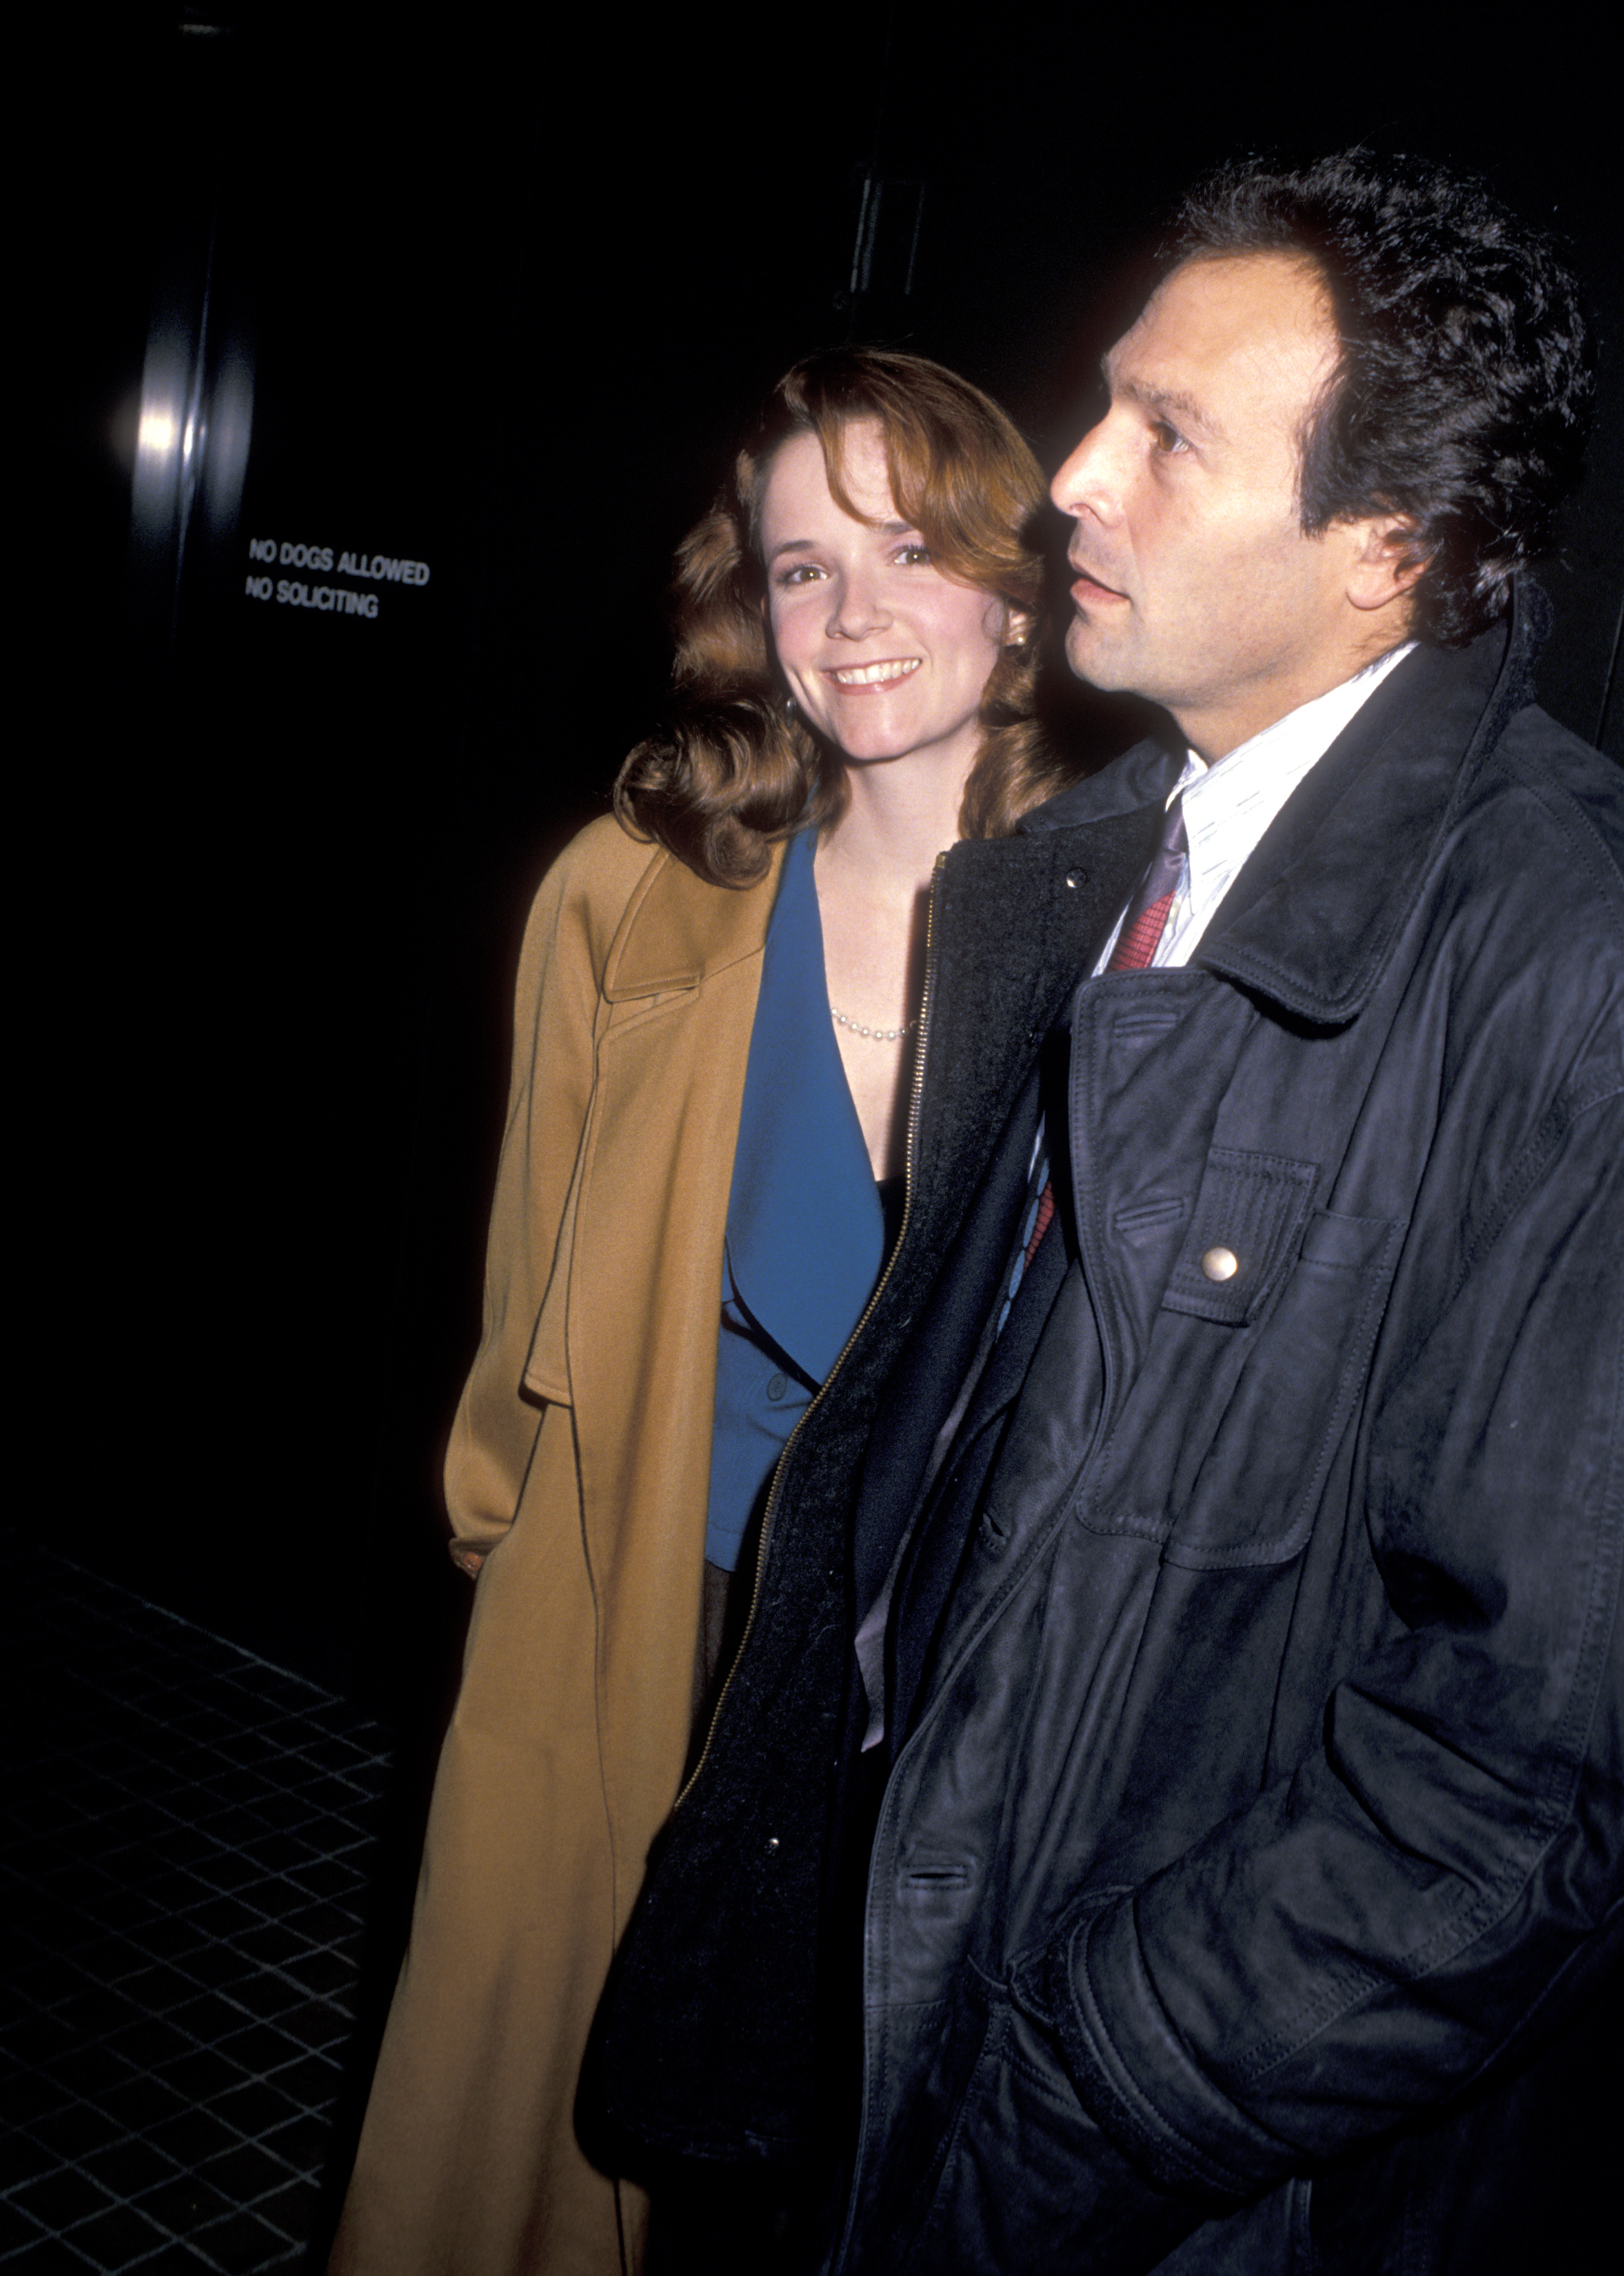 Lea Thompson and Howard Deutch at the "Working Girl" premiere on December 19, 1988 | Source: Getty Images